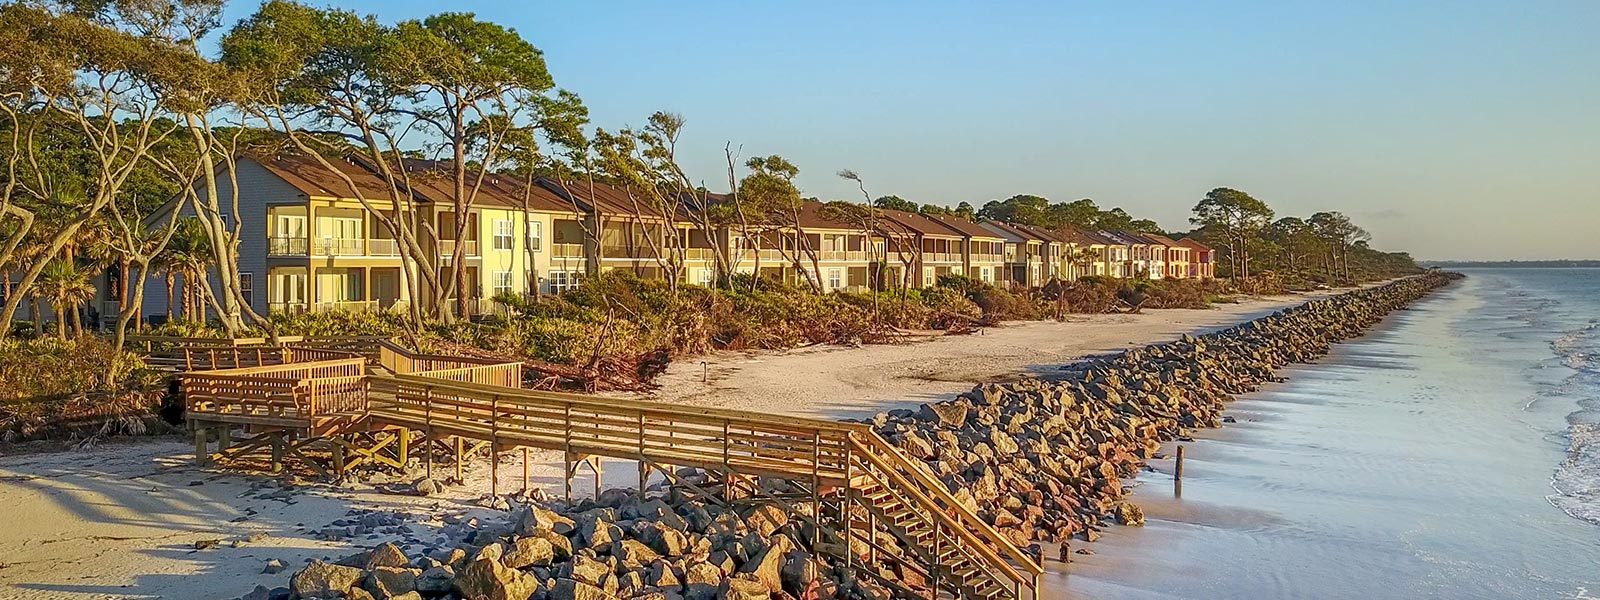 Cottages located on the beach at Jekyll Island